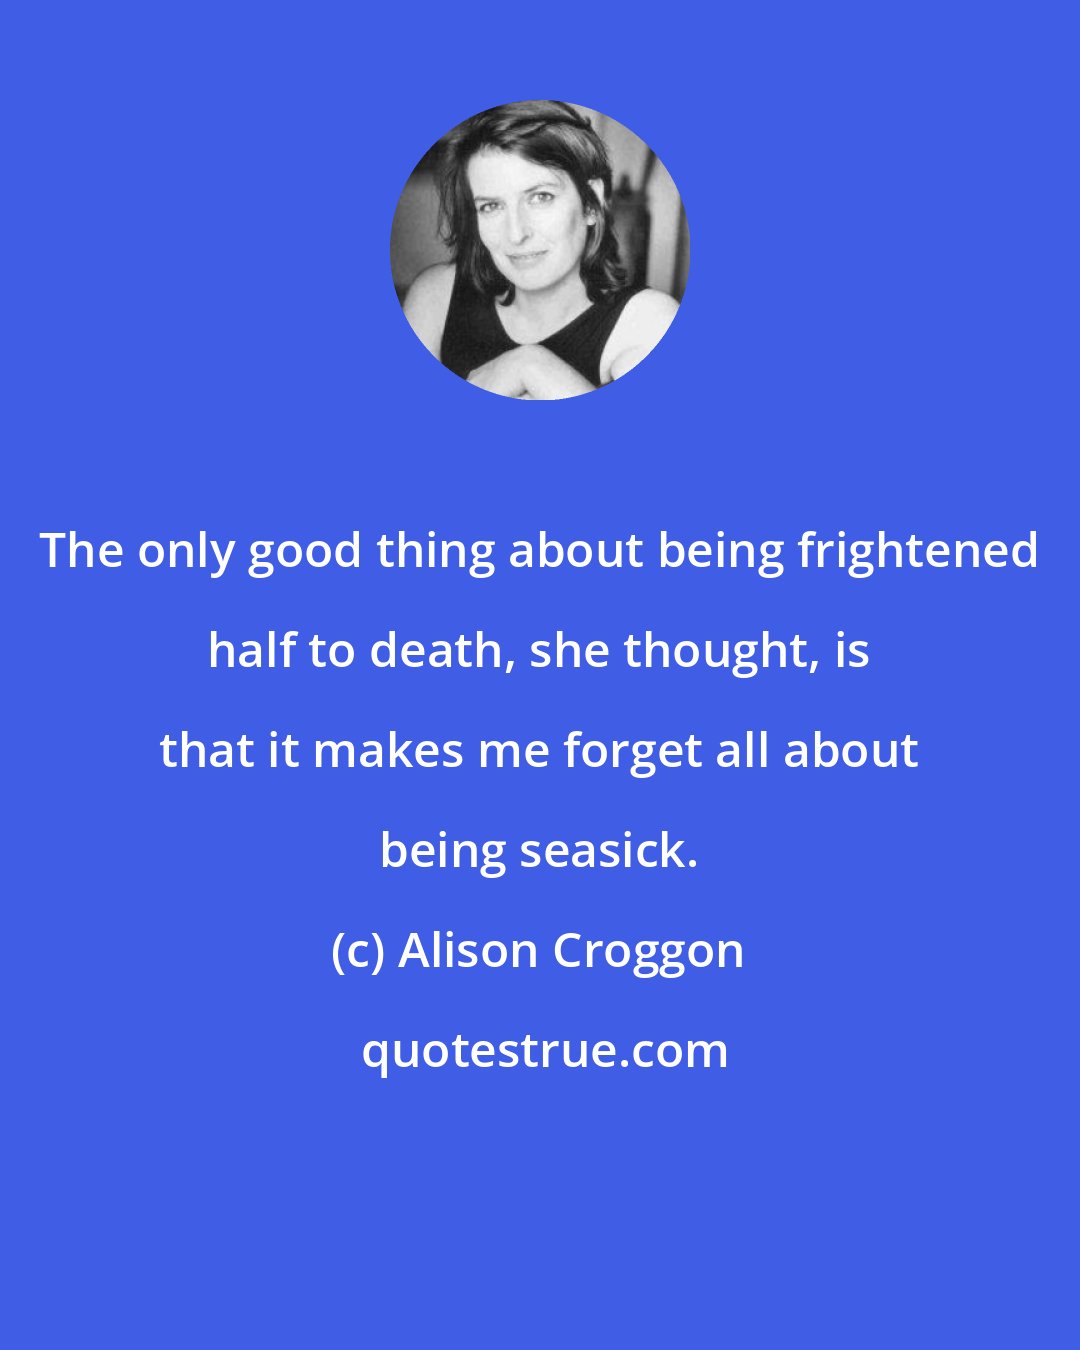 Alison Croggon: The only good thing about being frightened half to death, she thought, is that it makes me forget all about being seasick.